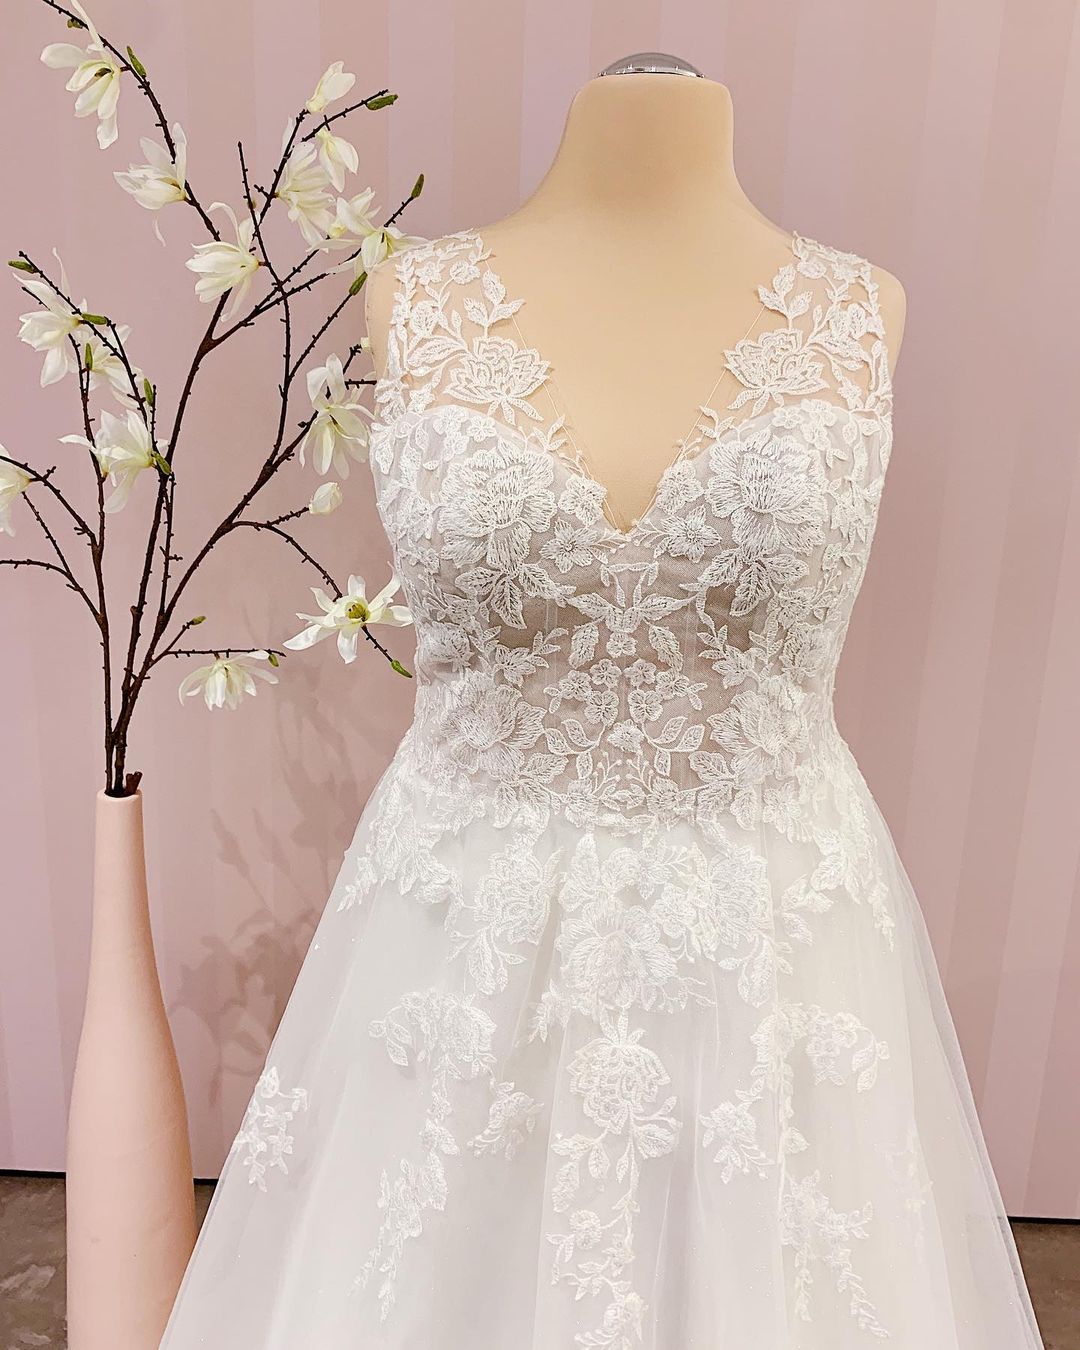 Wedding Dress For Brides, Simple Long V-neck A-Line Backless Wedding Dress With Appliques Lace